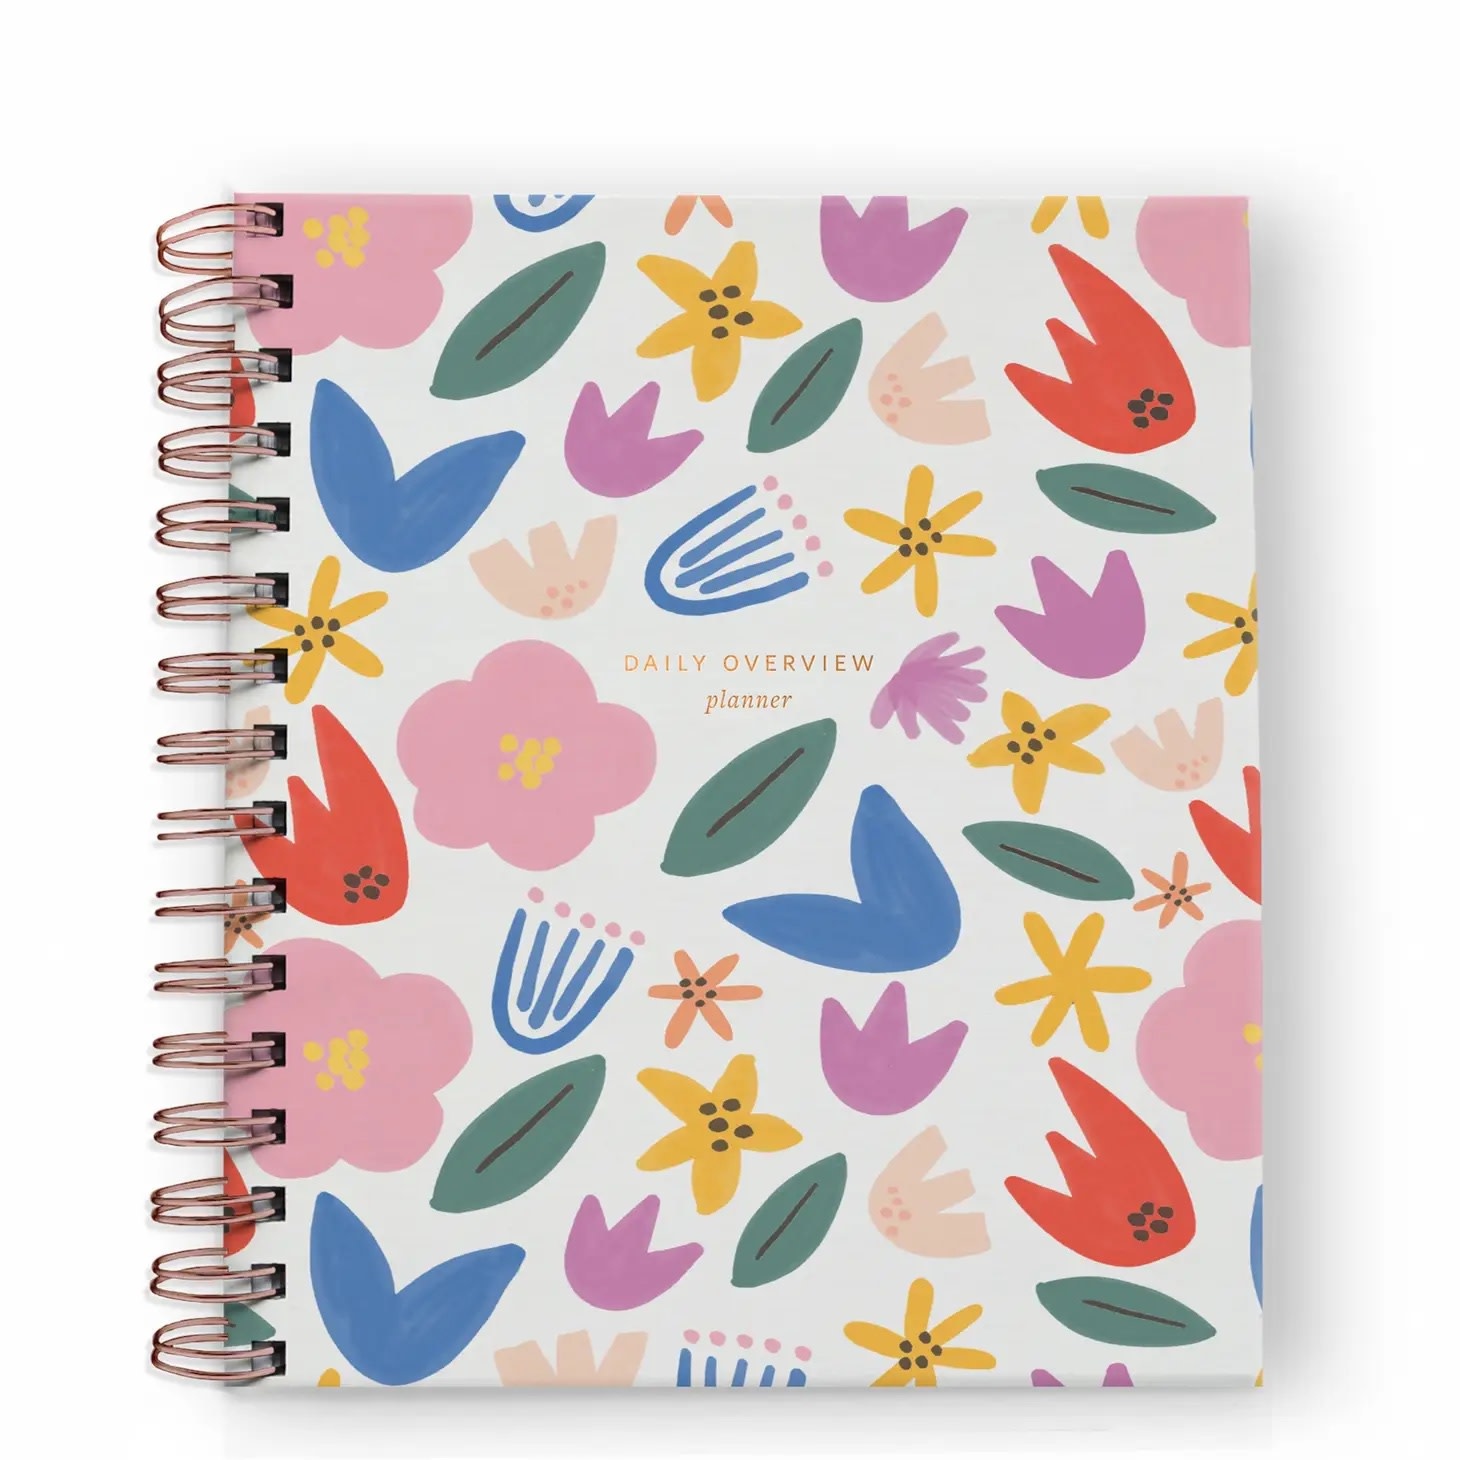 Ramona and Ruth - RR Ramona and Ruth - Daily Overview Undated Planner, Floral Party